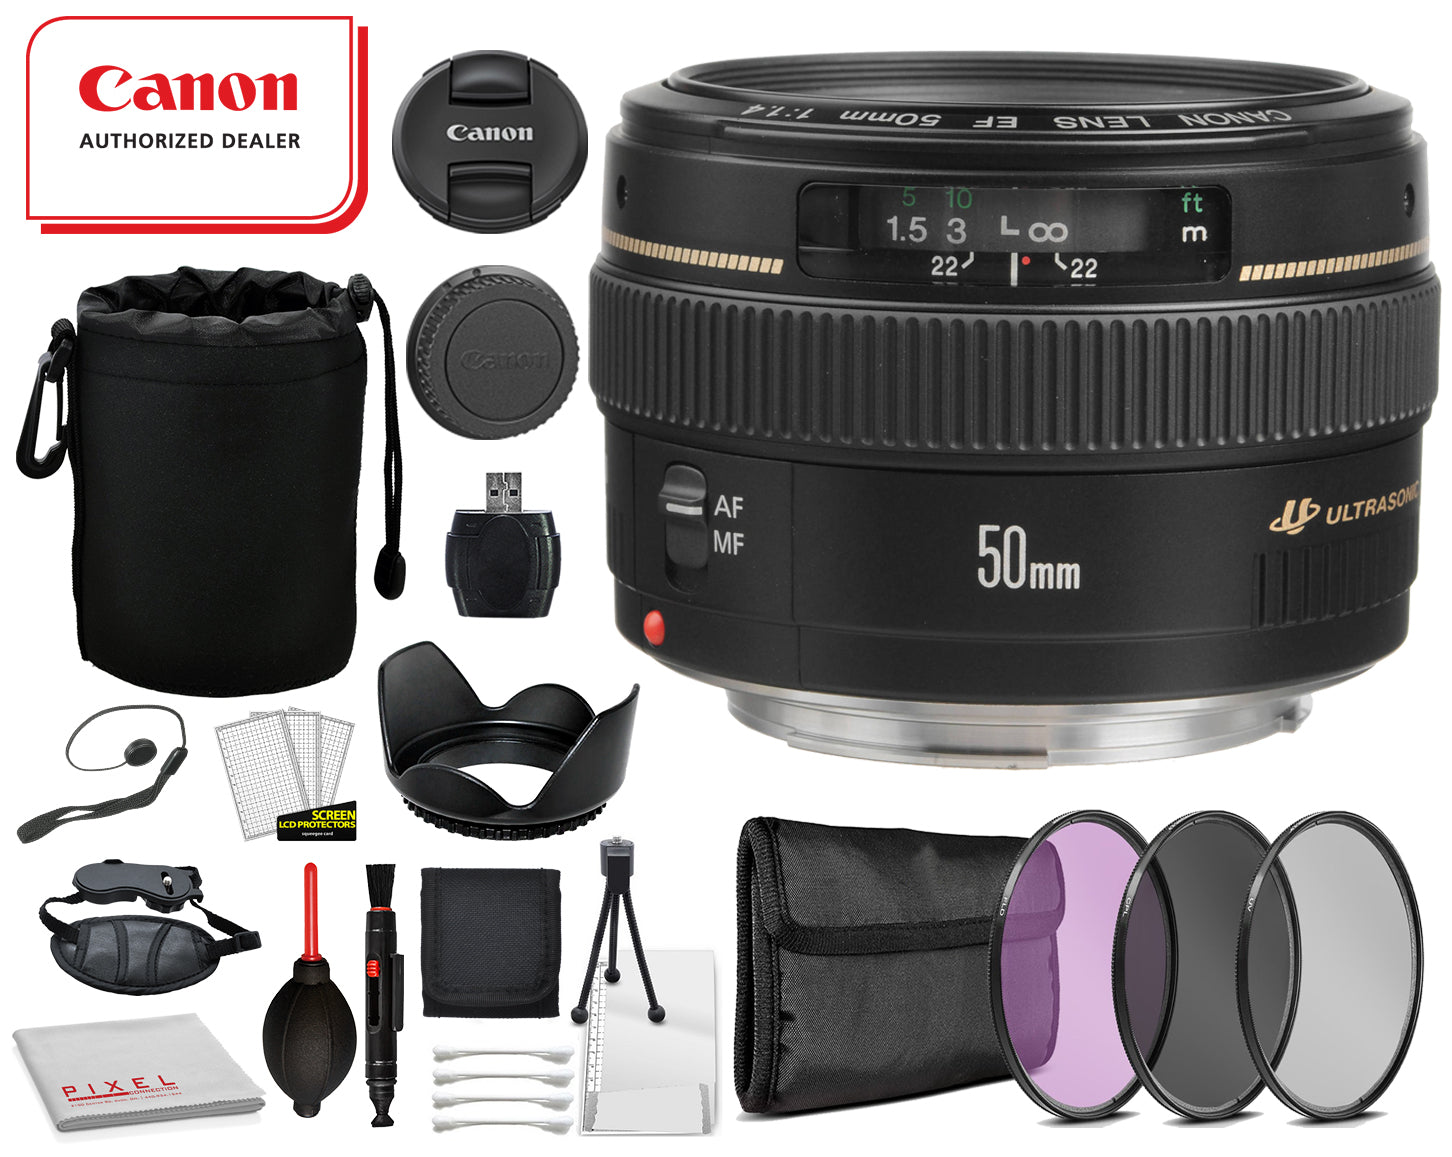 Canon EF 50mm f/1.4 USM Lens  (2515A003) Includes: Tulip Lens Hood, 3PC filter Kit, Lens Pouch + More